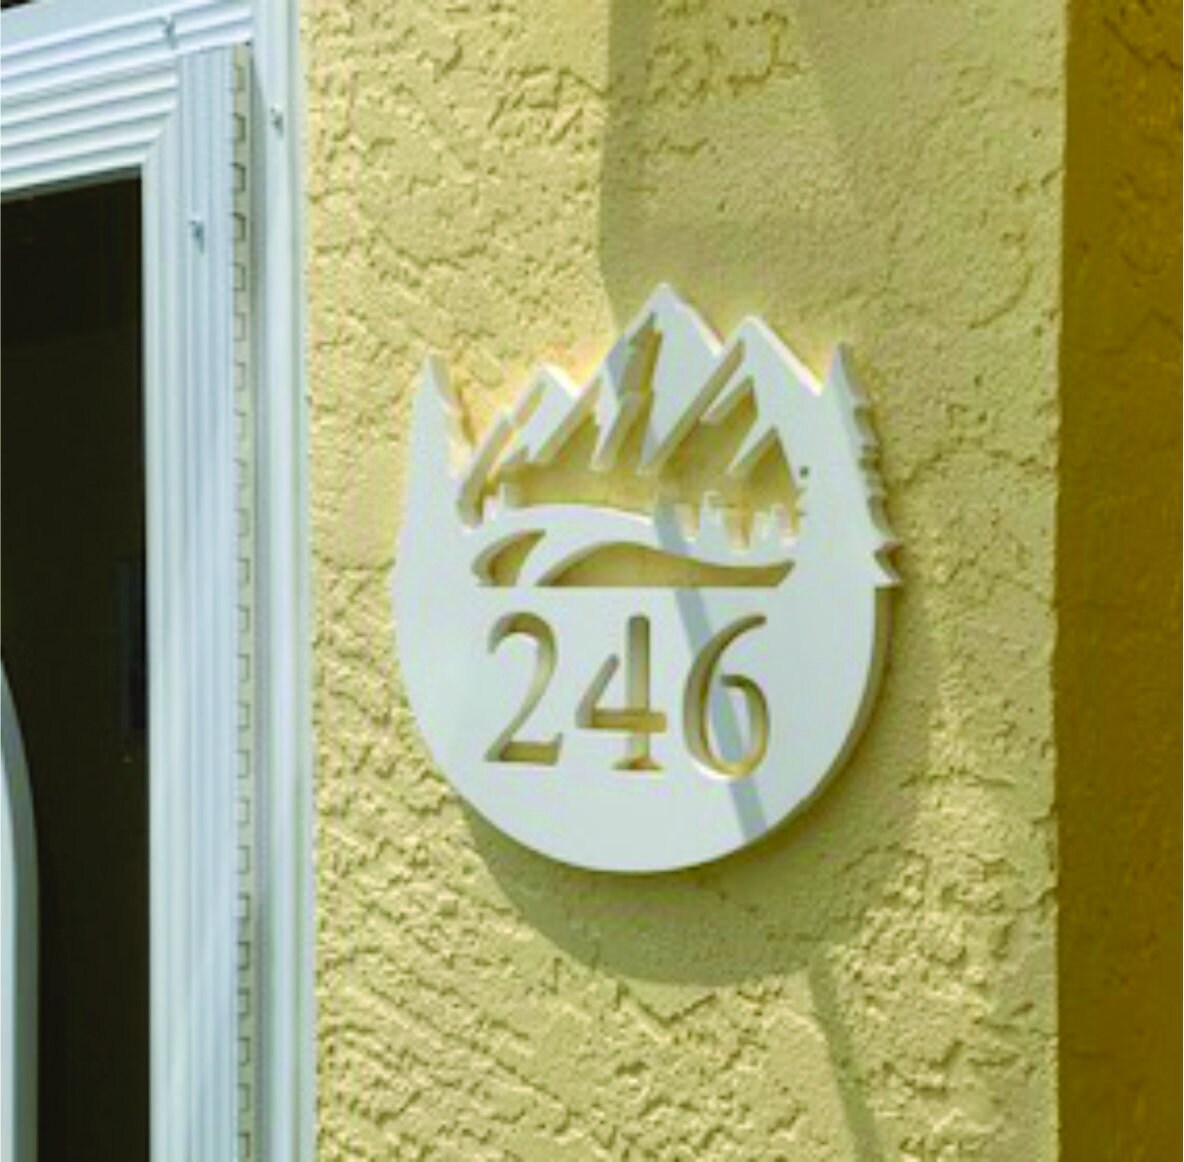 House Number Plaque - Mountain Range, Address Plaque, Custom, Personalized, Housewarming Gift, Outdoor Decor, Ships Free To Mainland USA